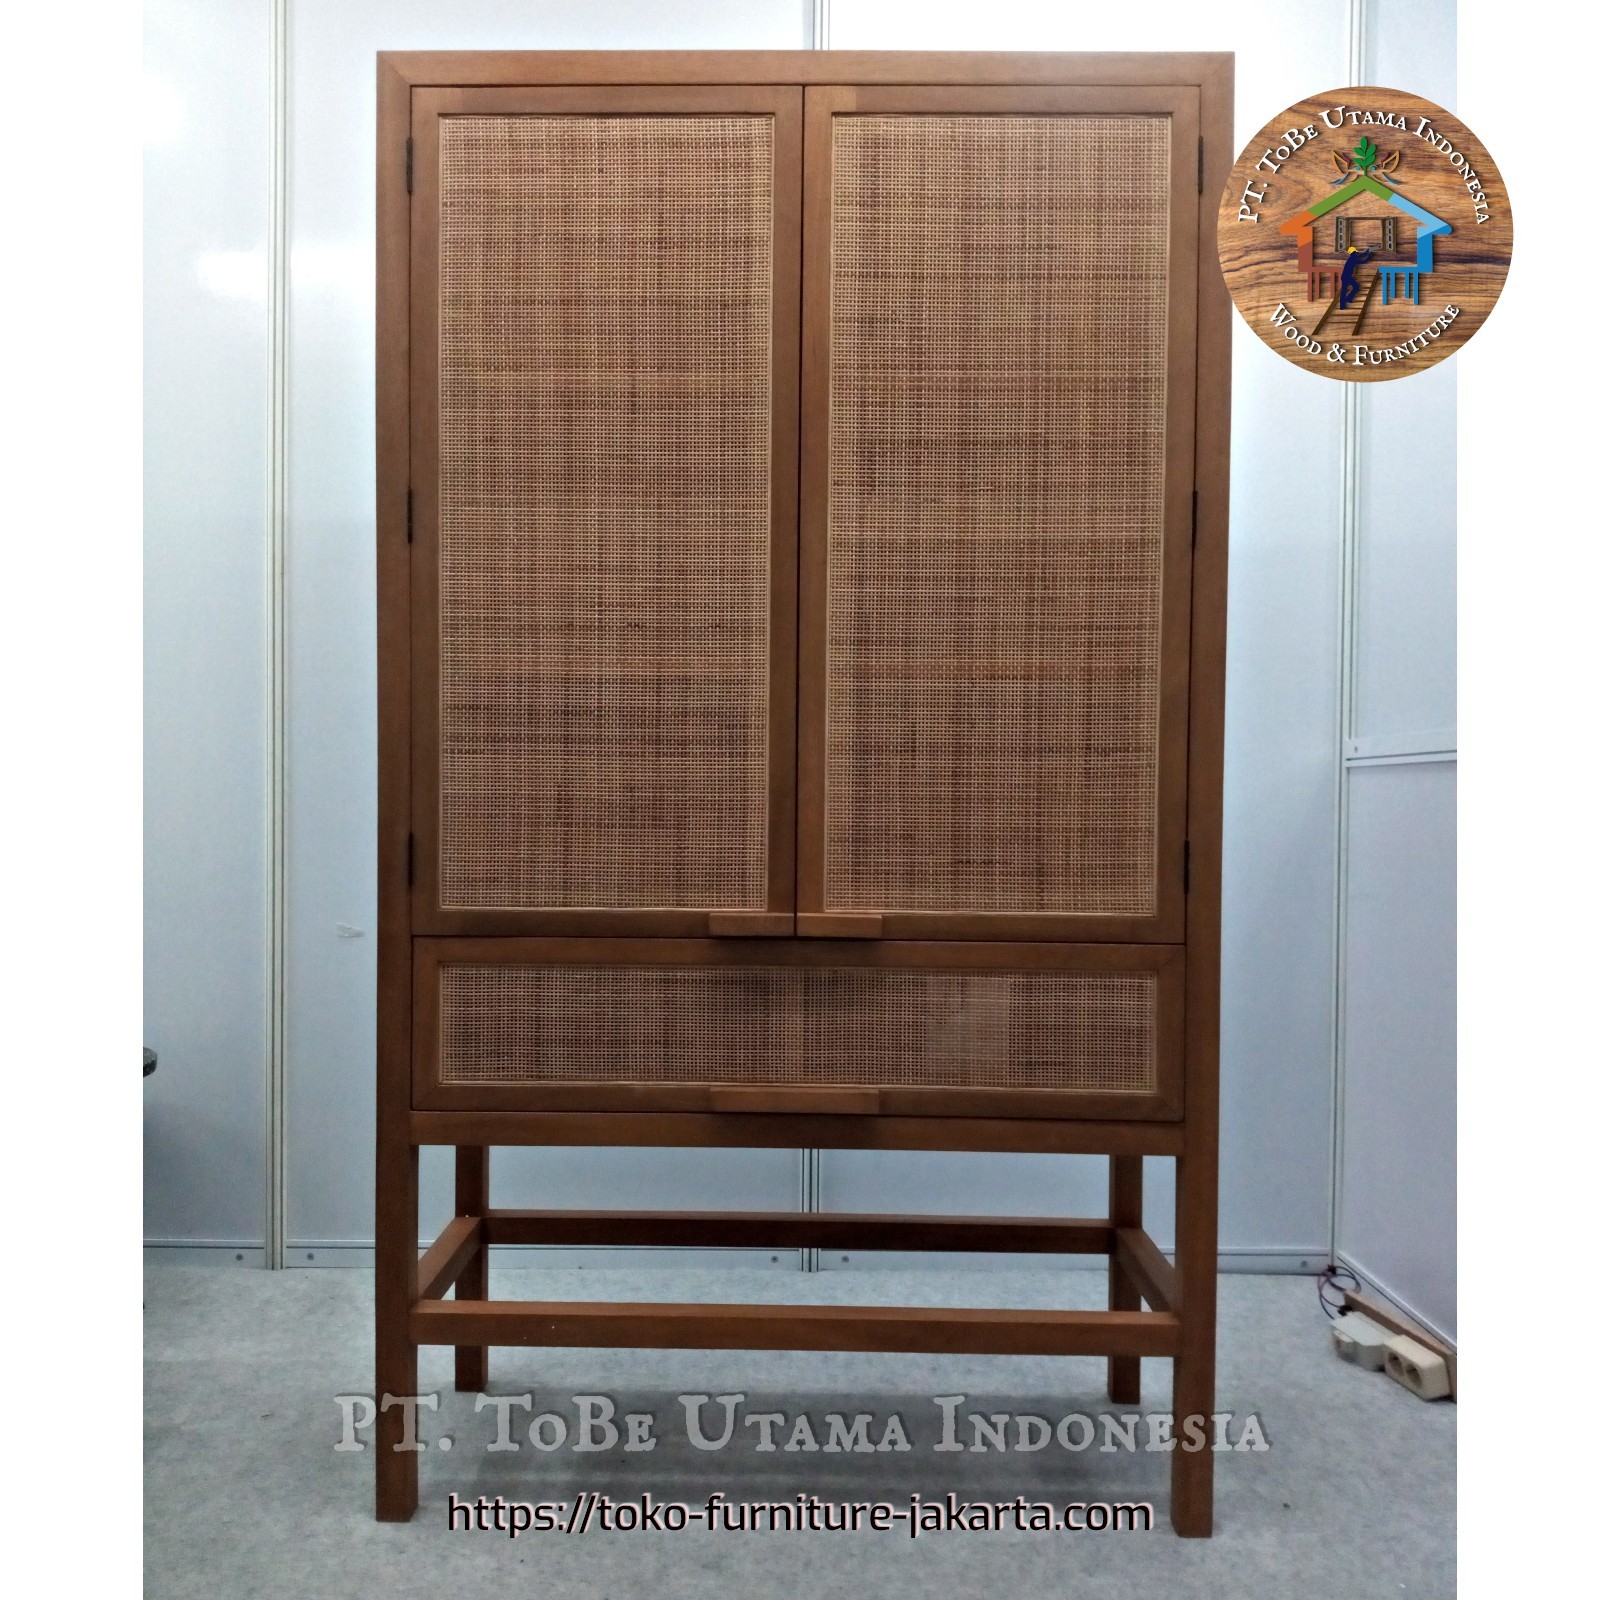 Living Room: Cabinet Minimalist made of solid wood, rattan, MDF (image 1 of 1).